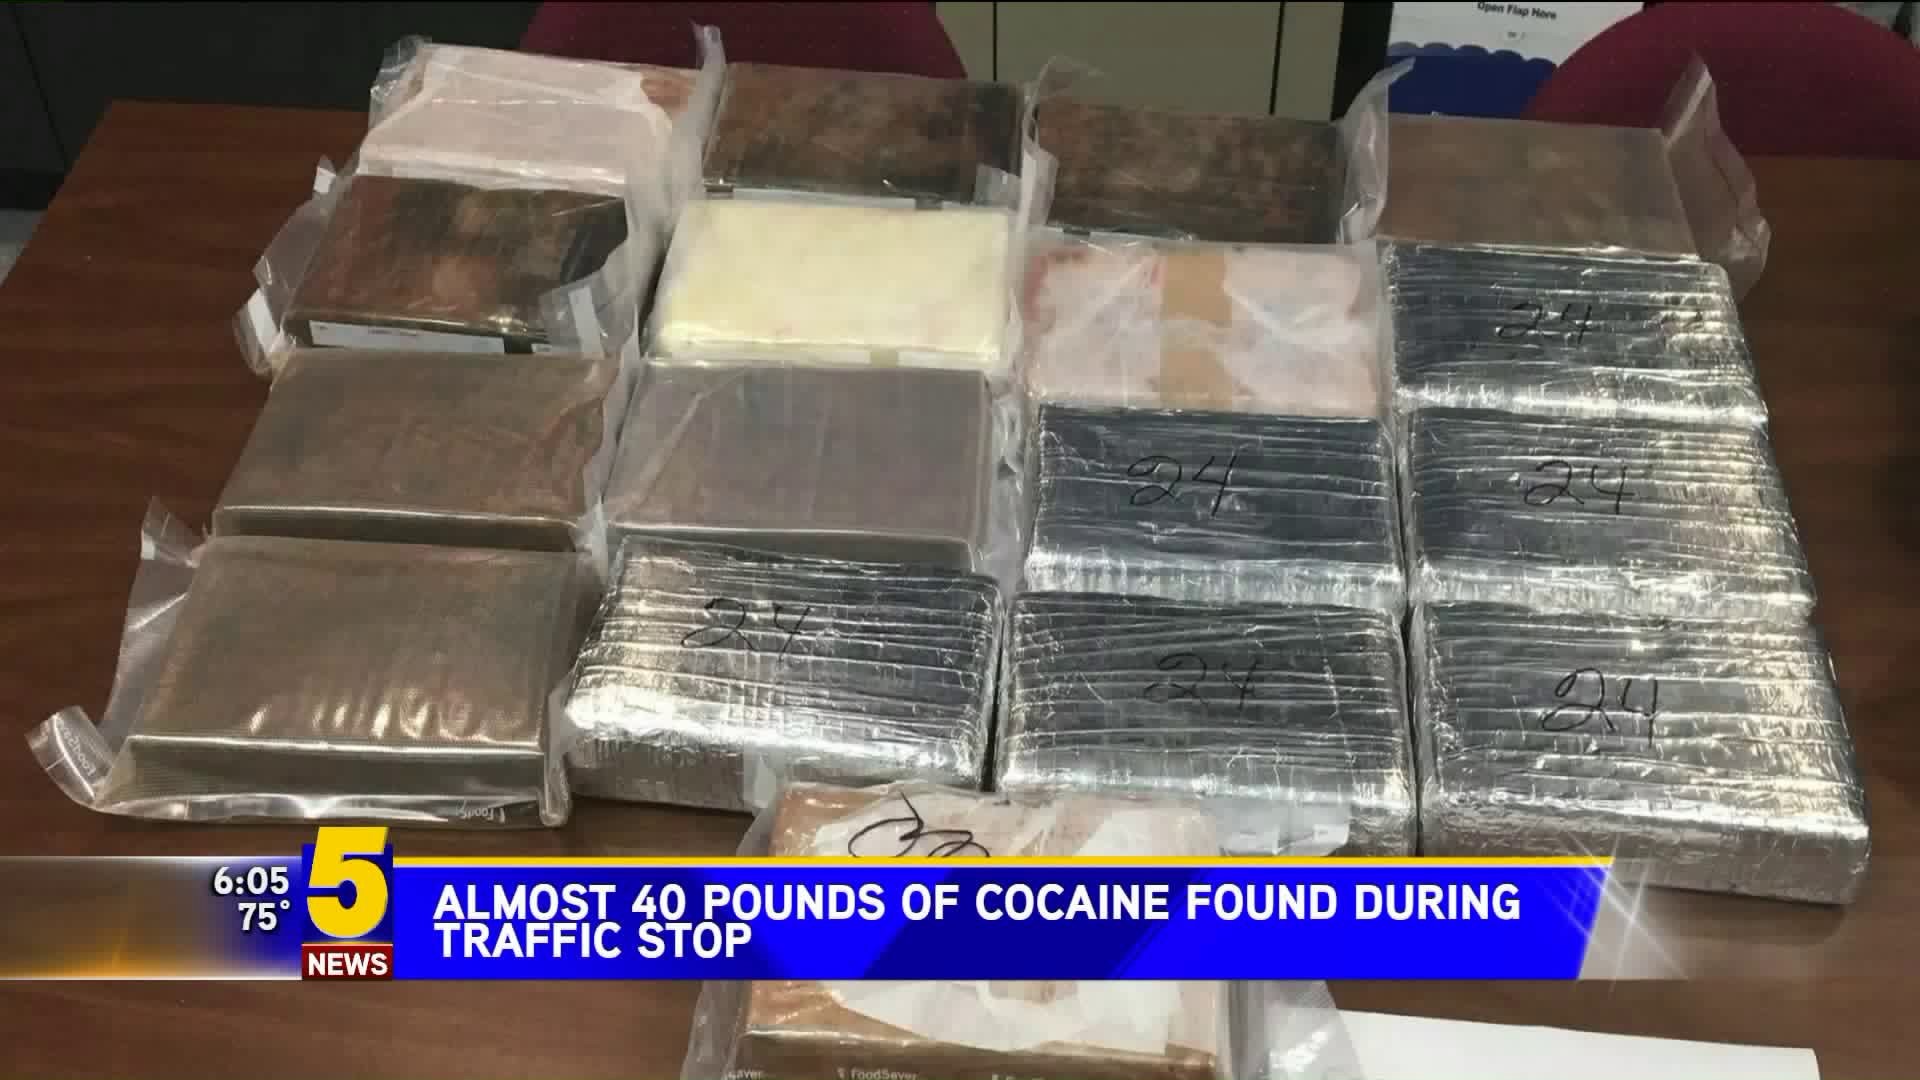 Almost 40 Pounds of Cocaine Found During Traffic Stop